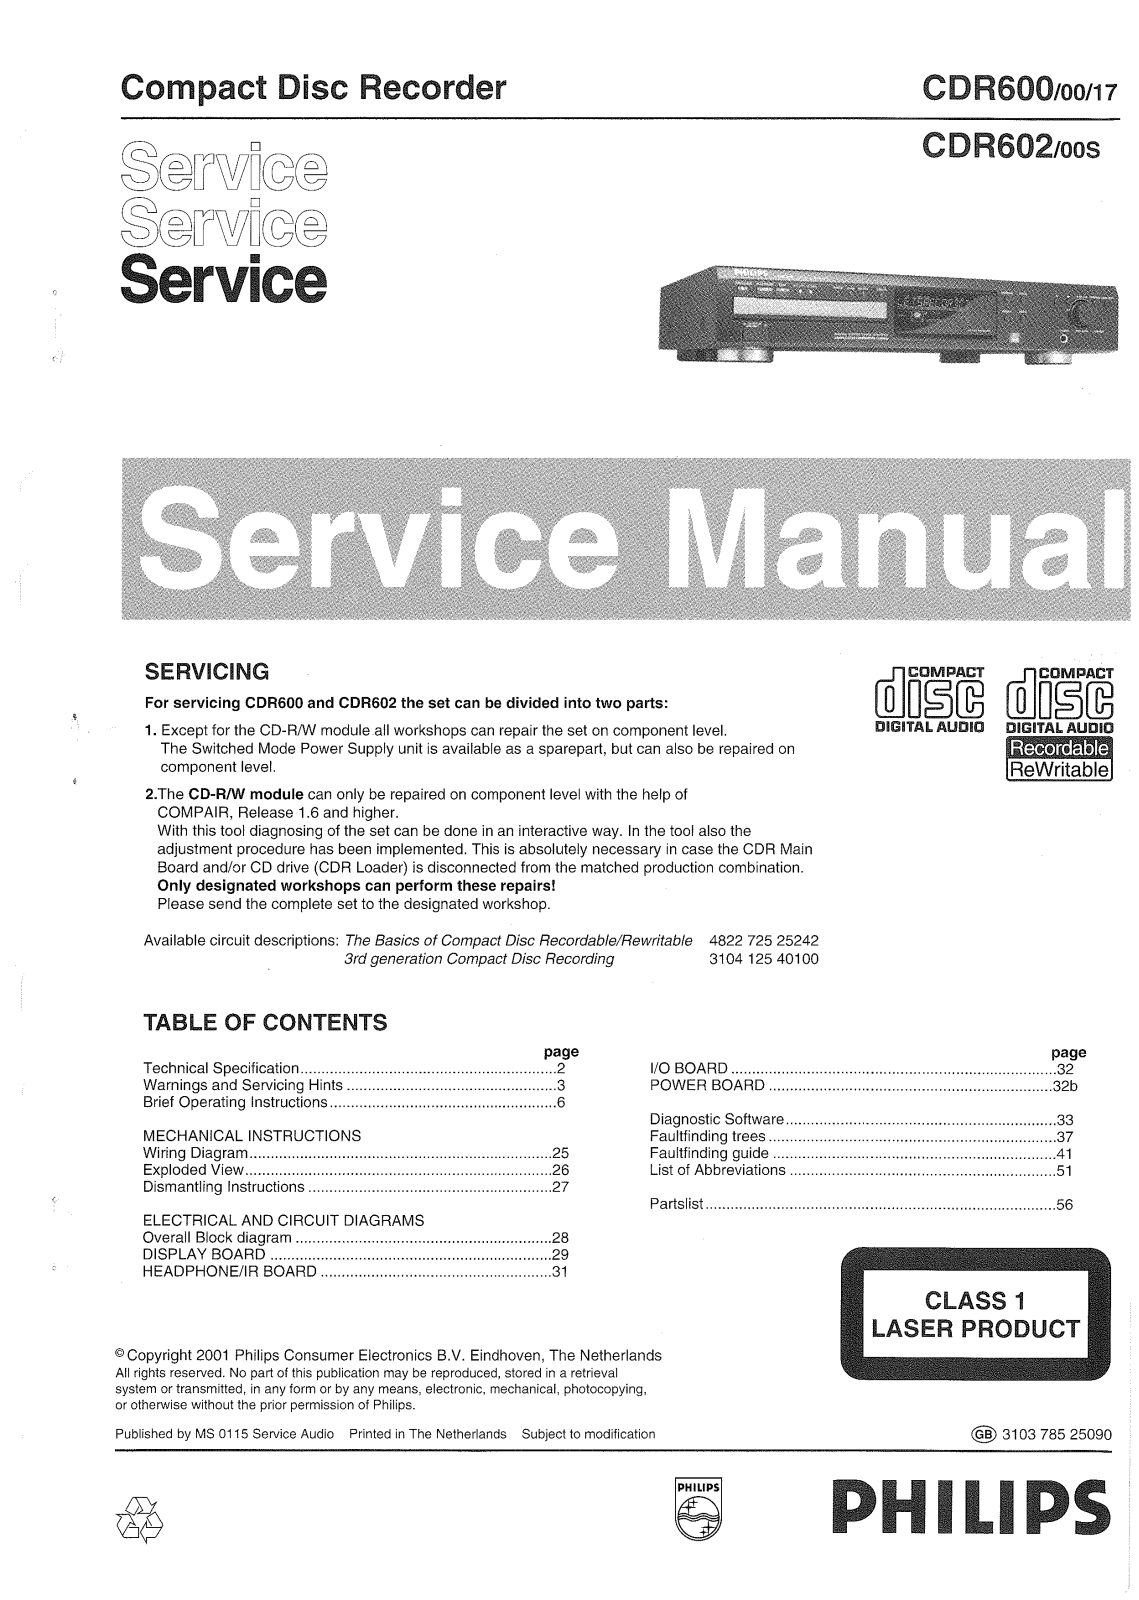 Philips CDR-600, CDR-602 Service manual